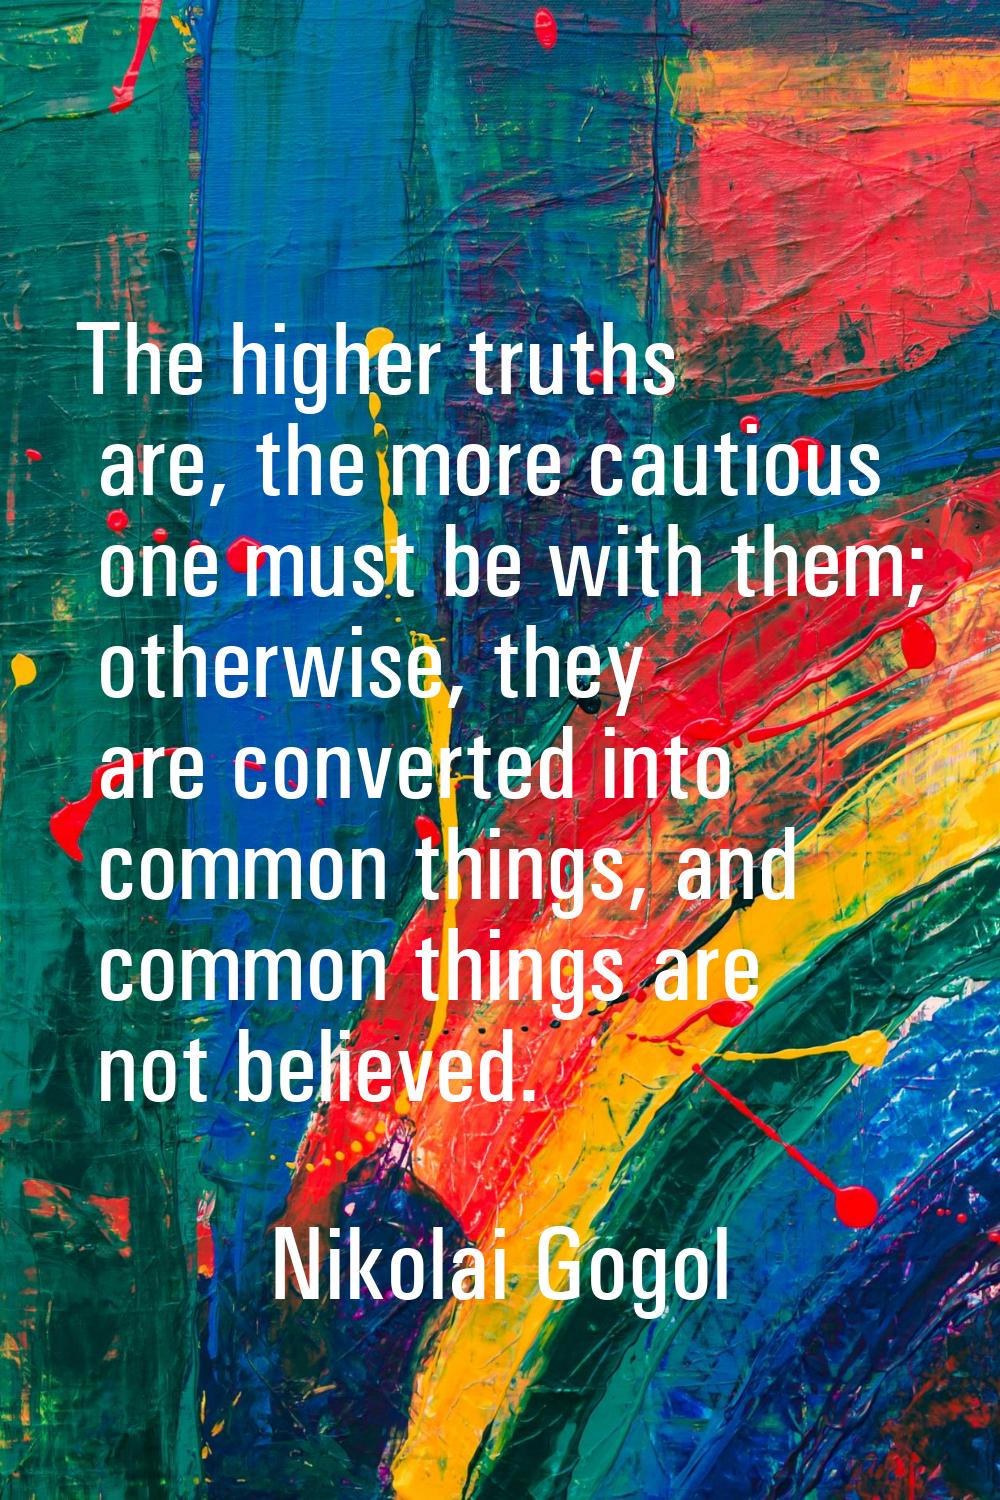 The higher truths are, the more cautious one must be with them; otherwise, they are converted into 